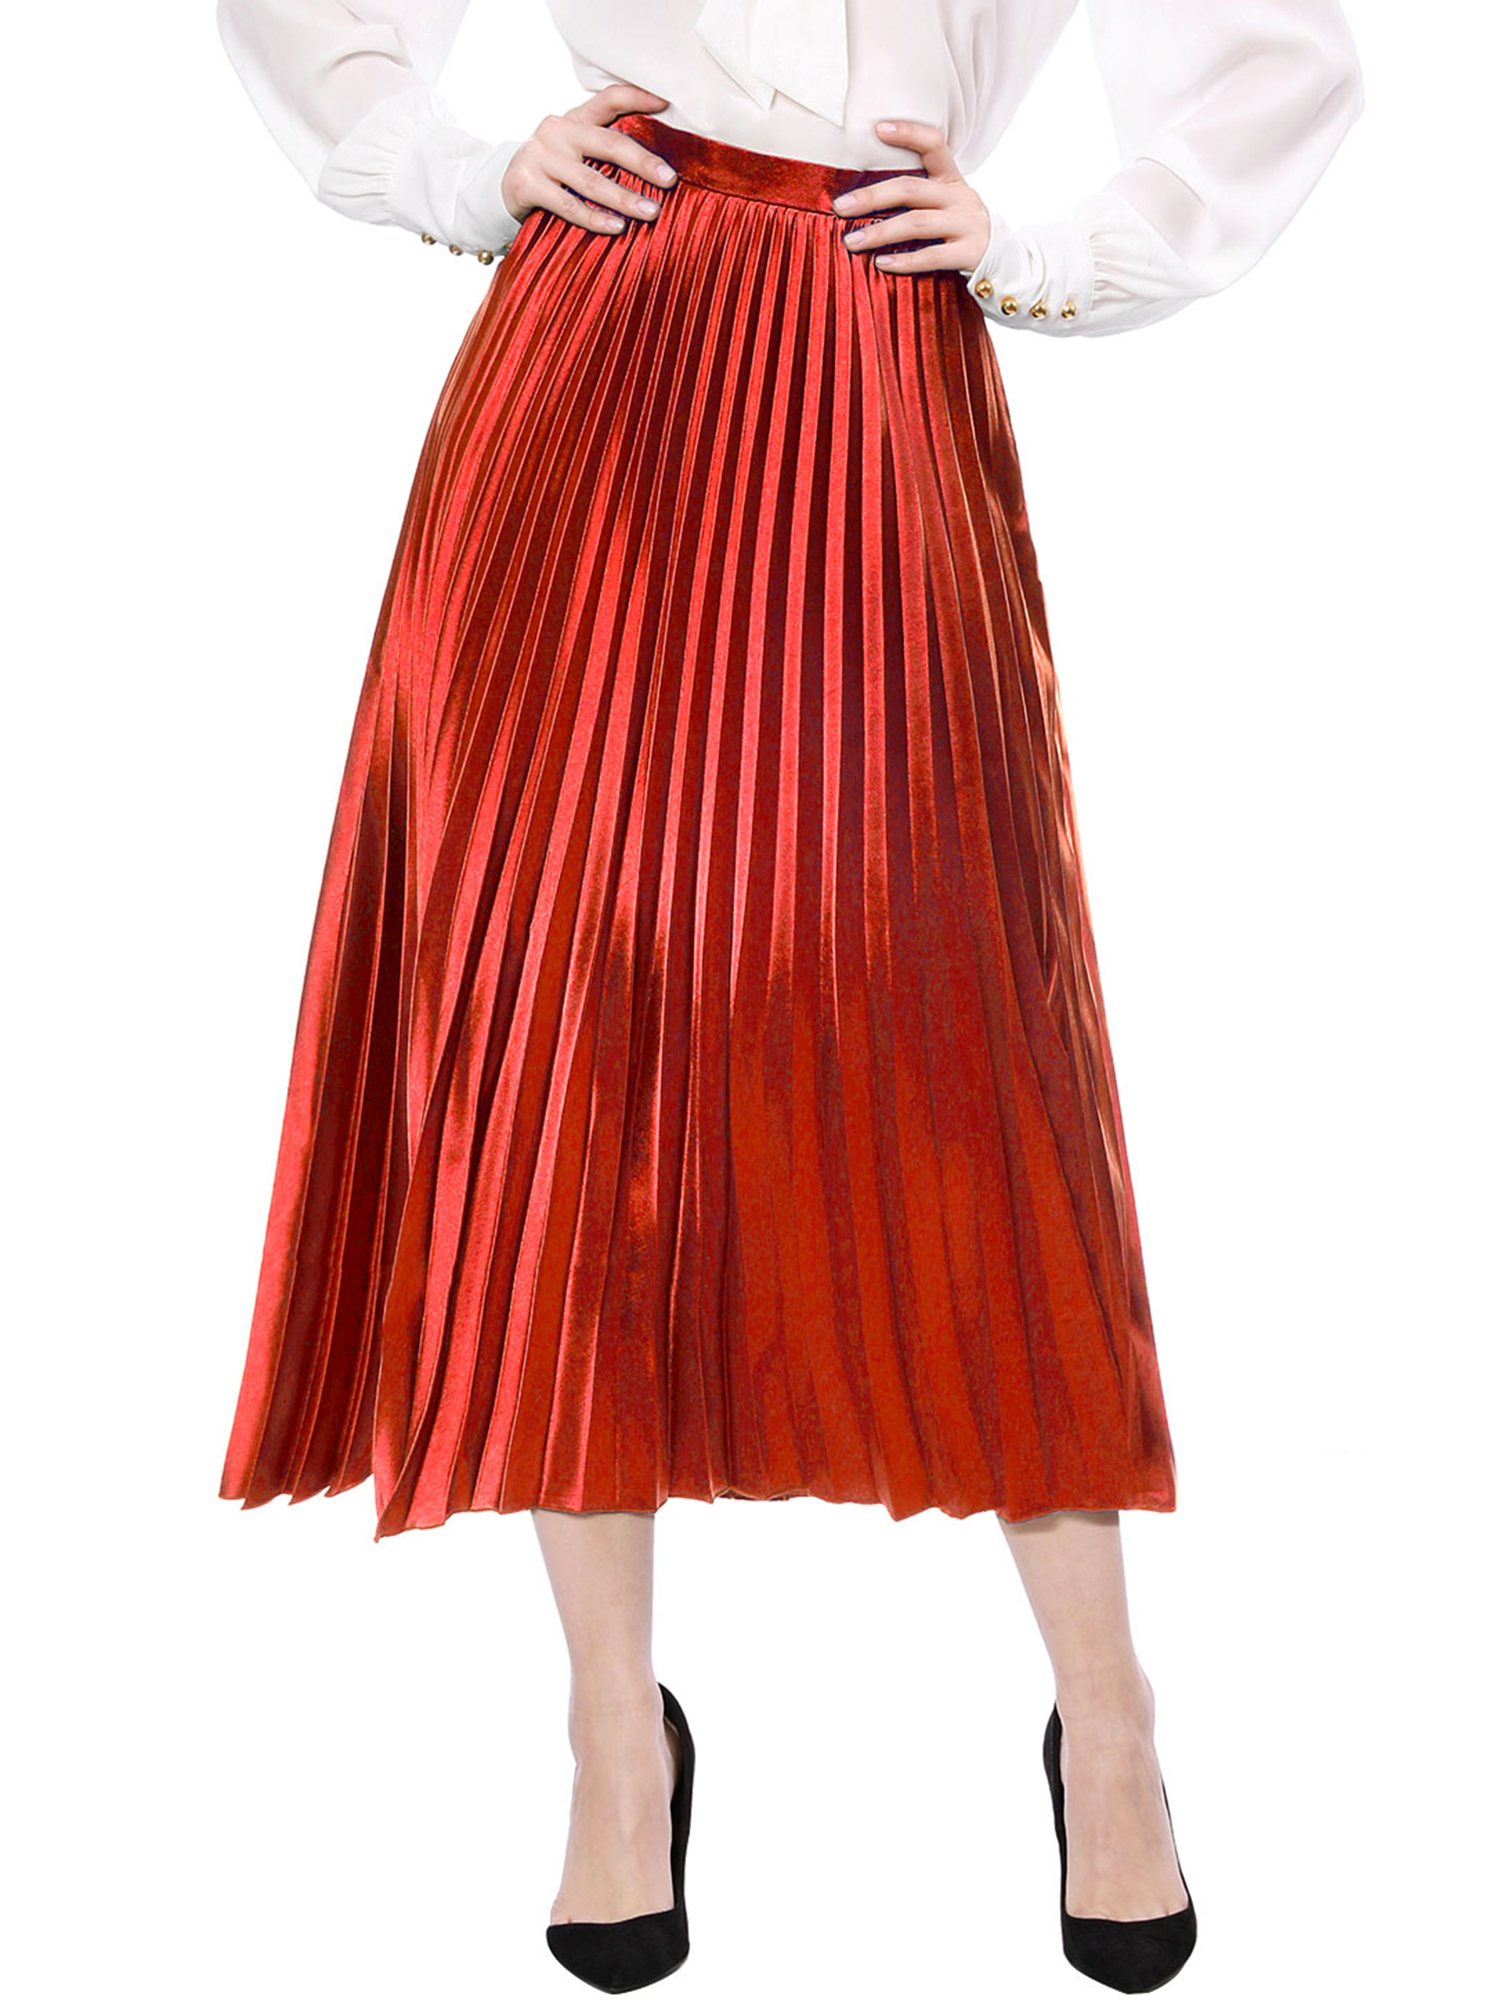 Unique Bargains Women's Halloween Costume A-line High Waist Pleated Midi Skirt L Red - image 3 of 8